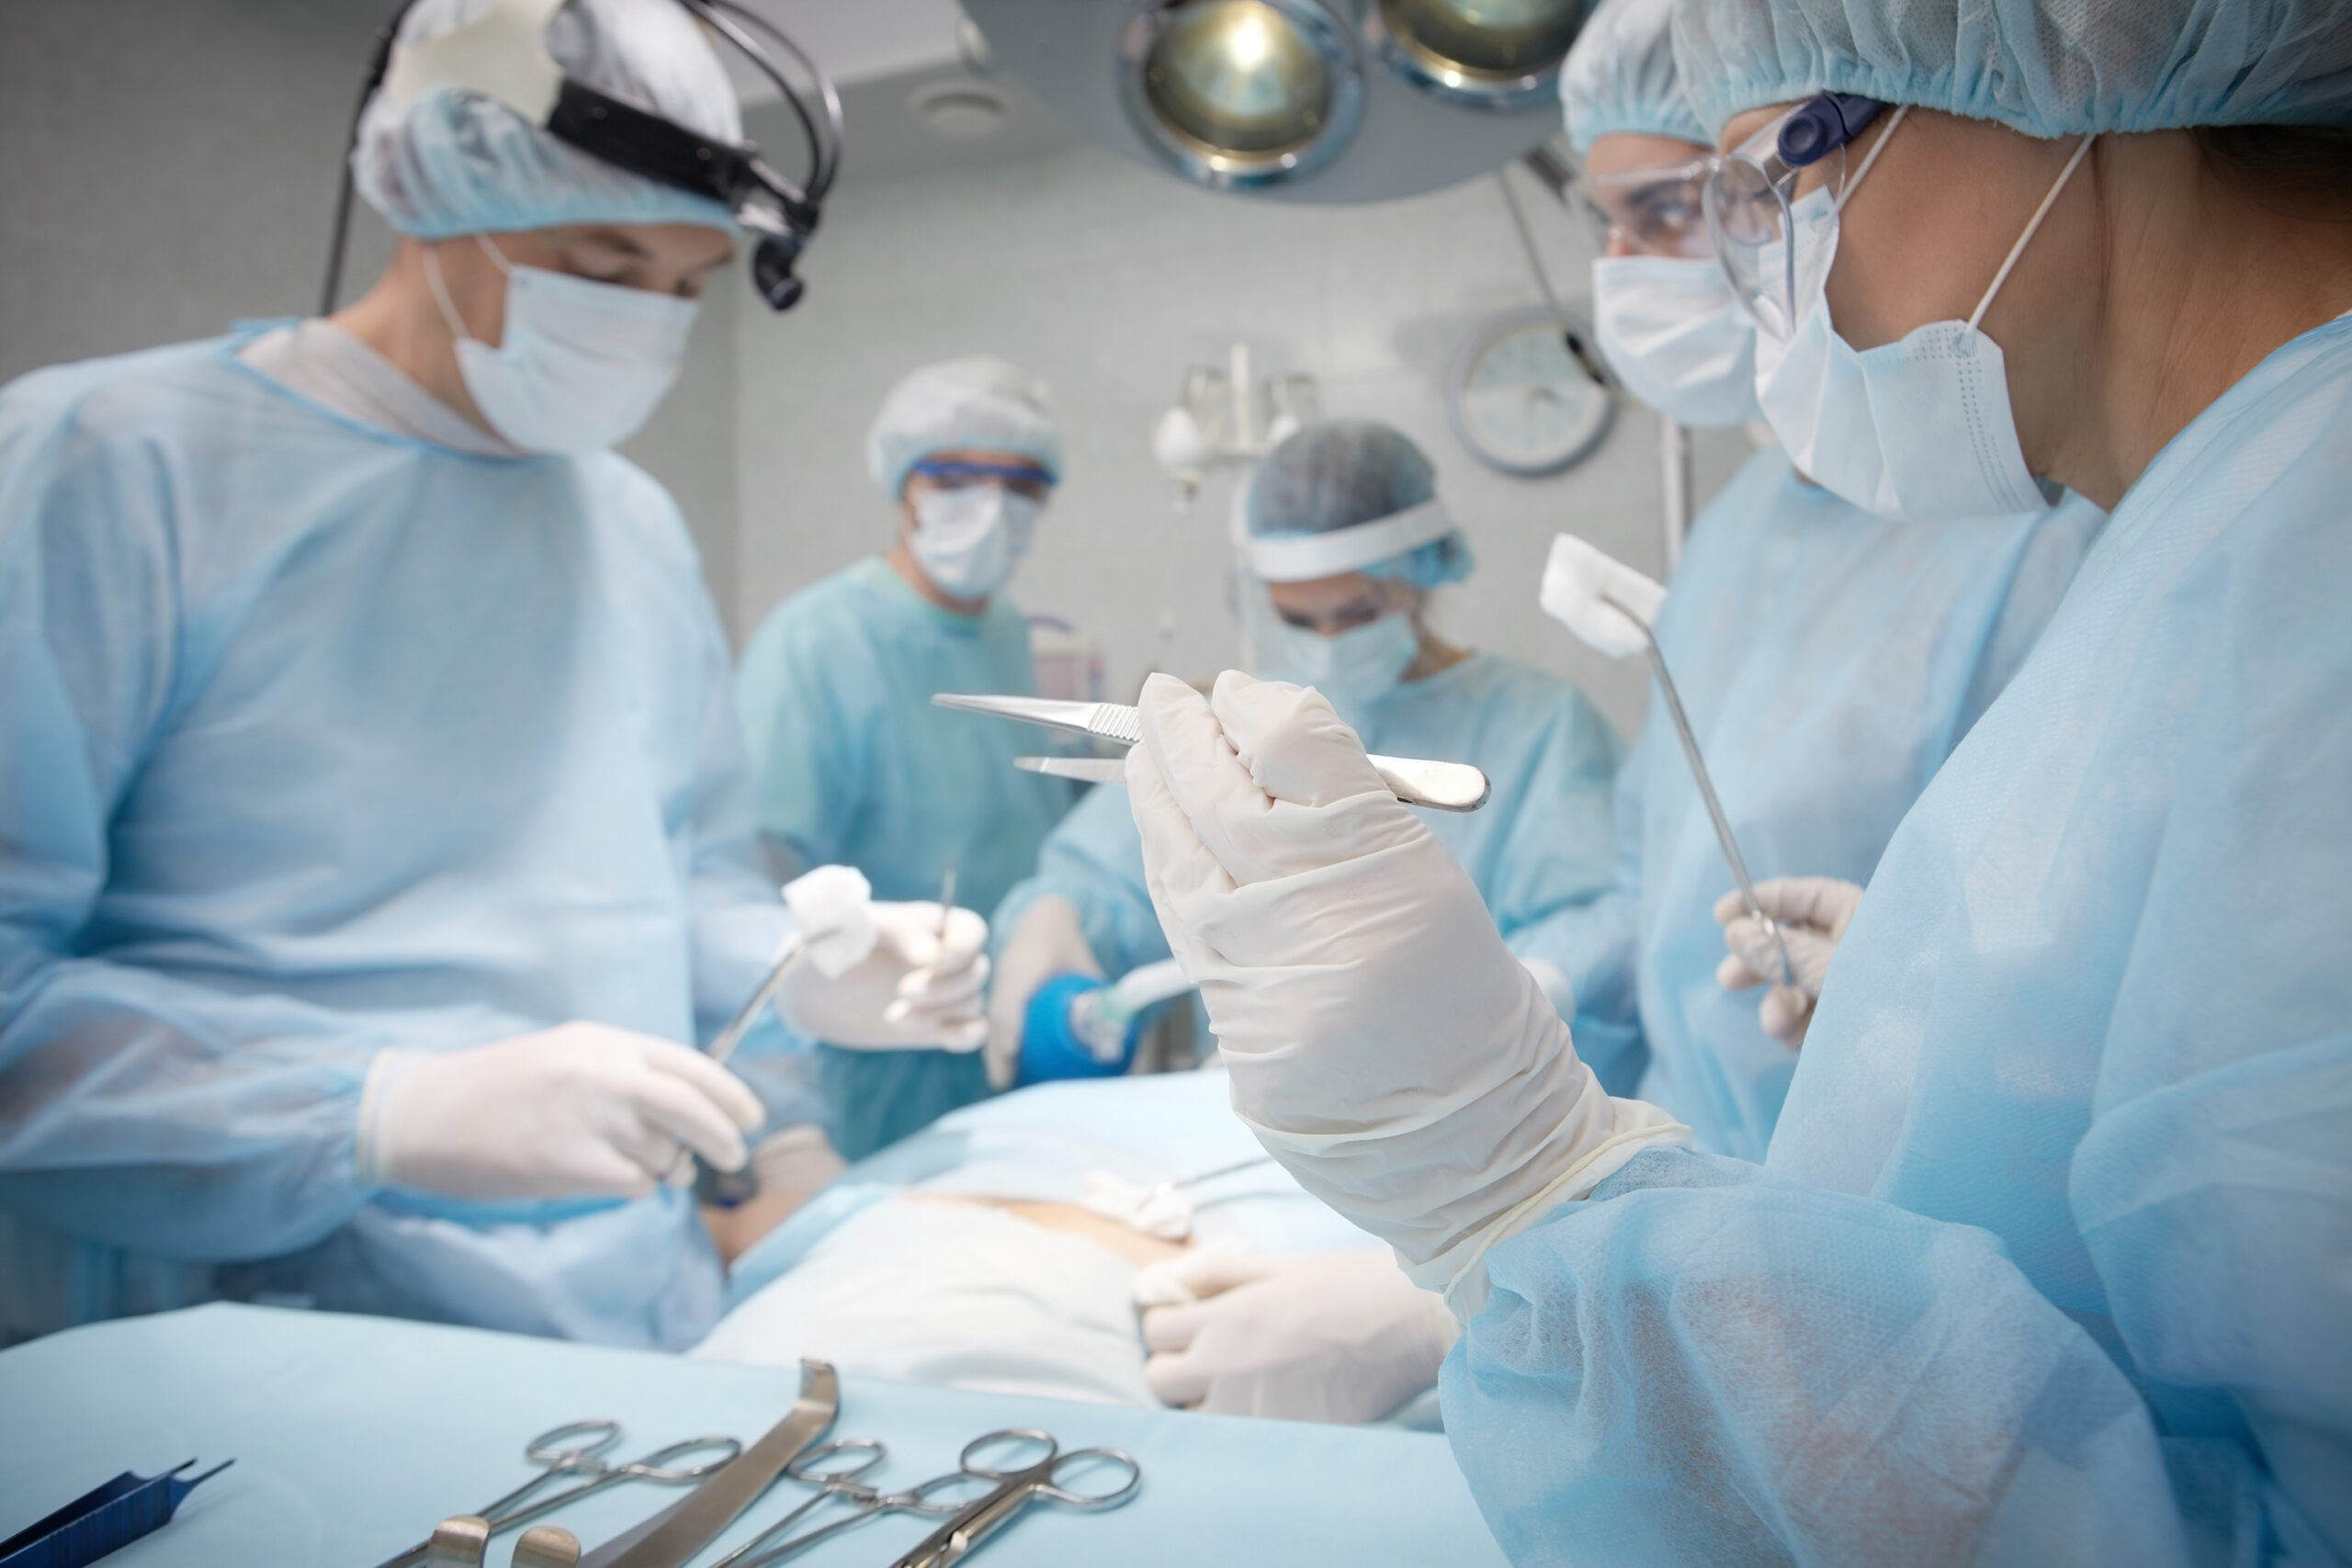 A team of surgeons holding surgical instruments and performing surgery.